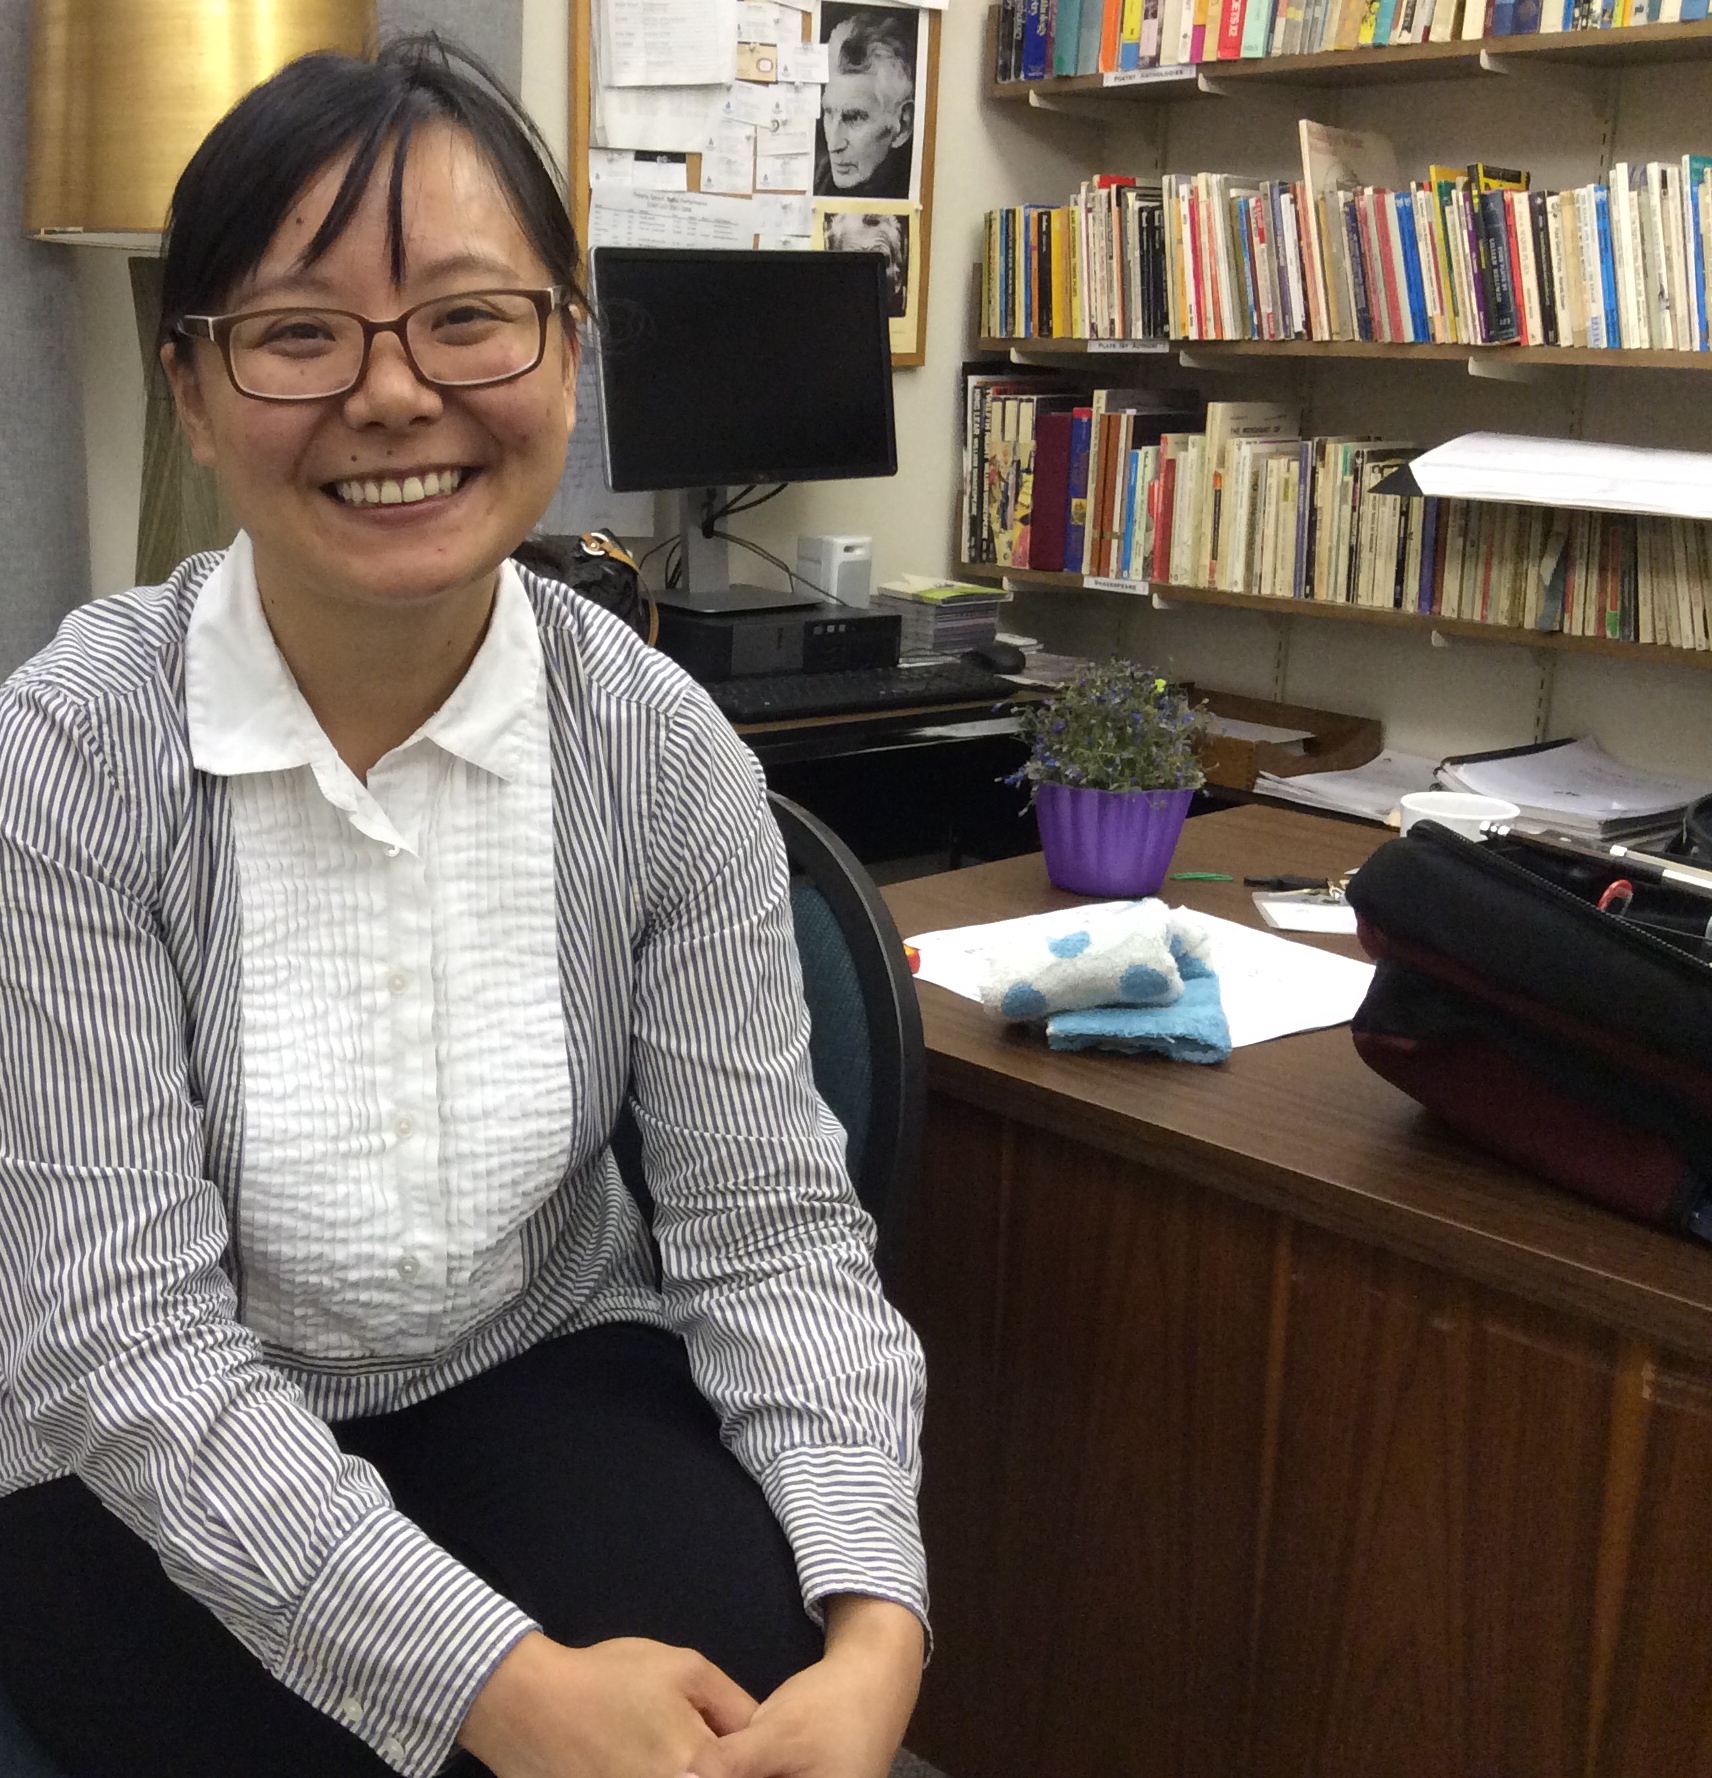 Violist Teng Li returns to Morningside Music Bridge as a faculty member. She was among the first viola students accepted into the program 16 years ago.